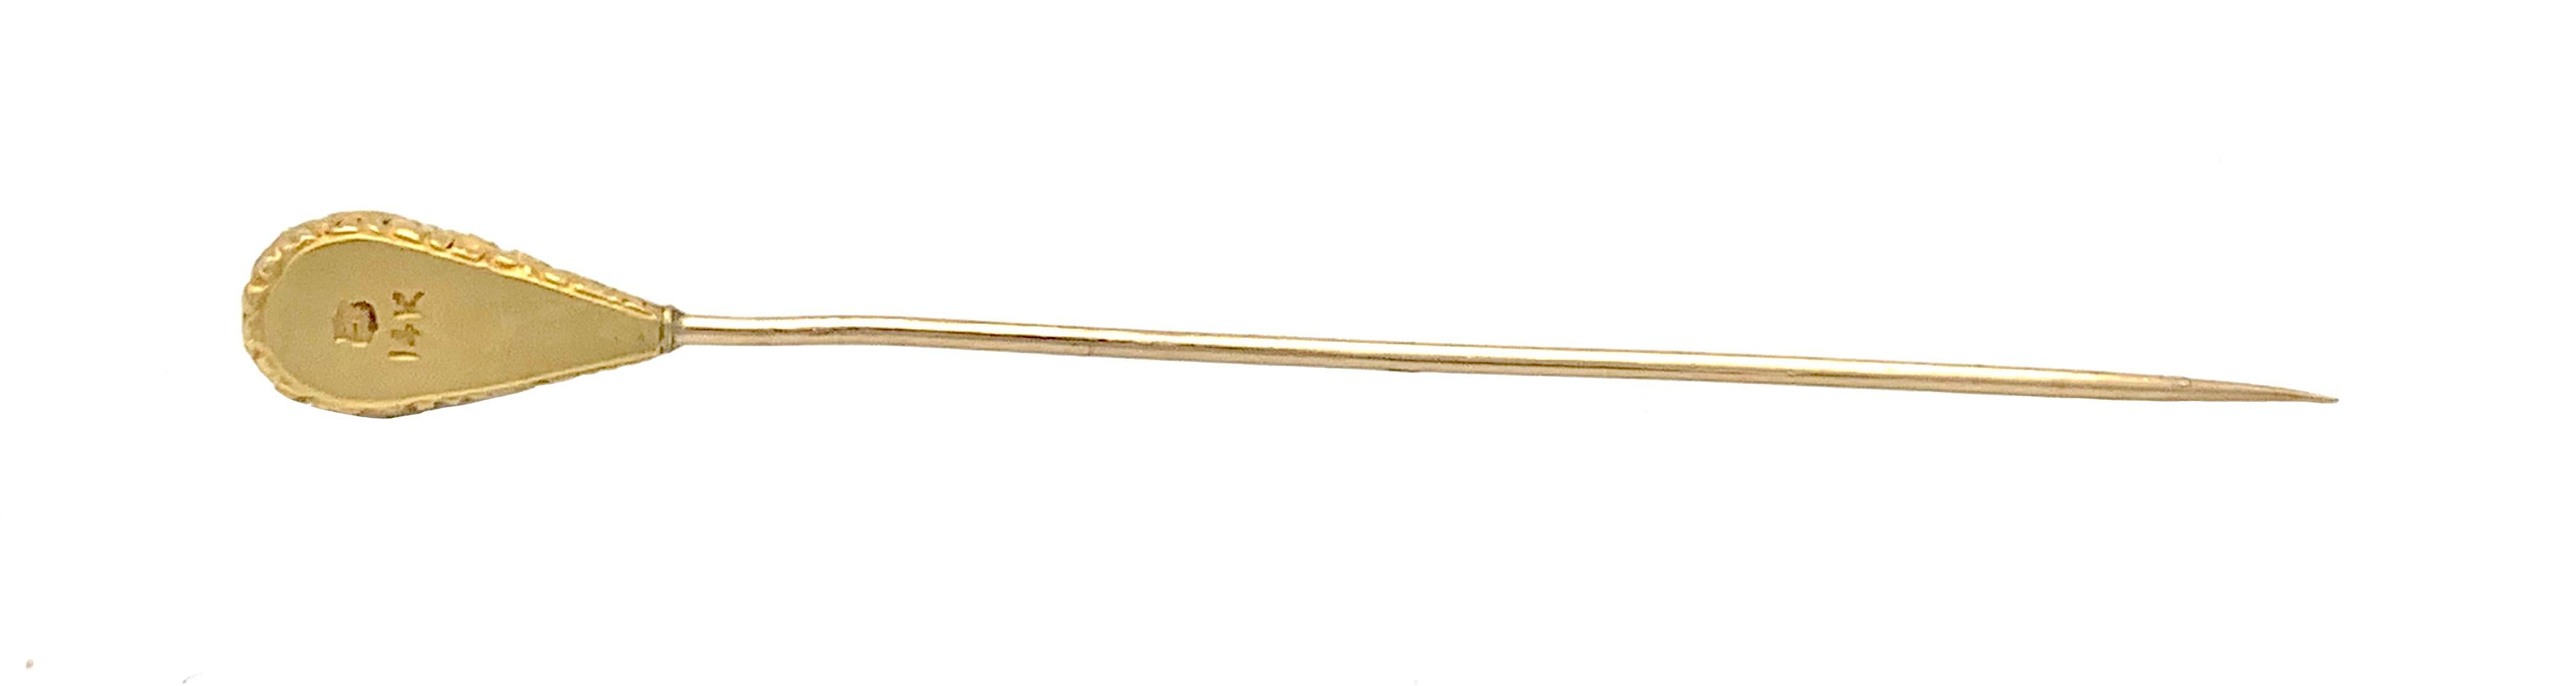 This elegant stickpin was made out of 14K yellow gold in the last quarter of the 19th century. The gold is embossed in high relief and shows a foliage design. The center of the pin head is decorated with a small natural pearl. On the reverse the